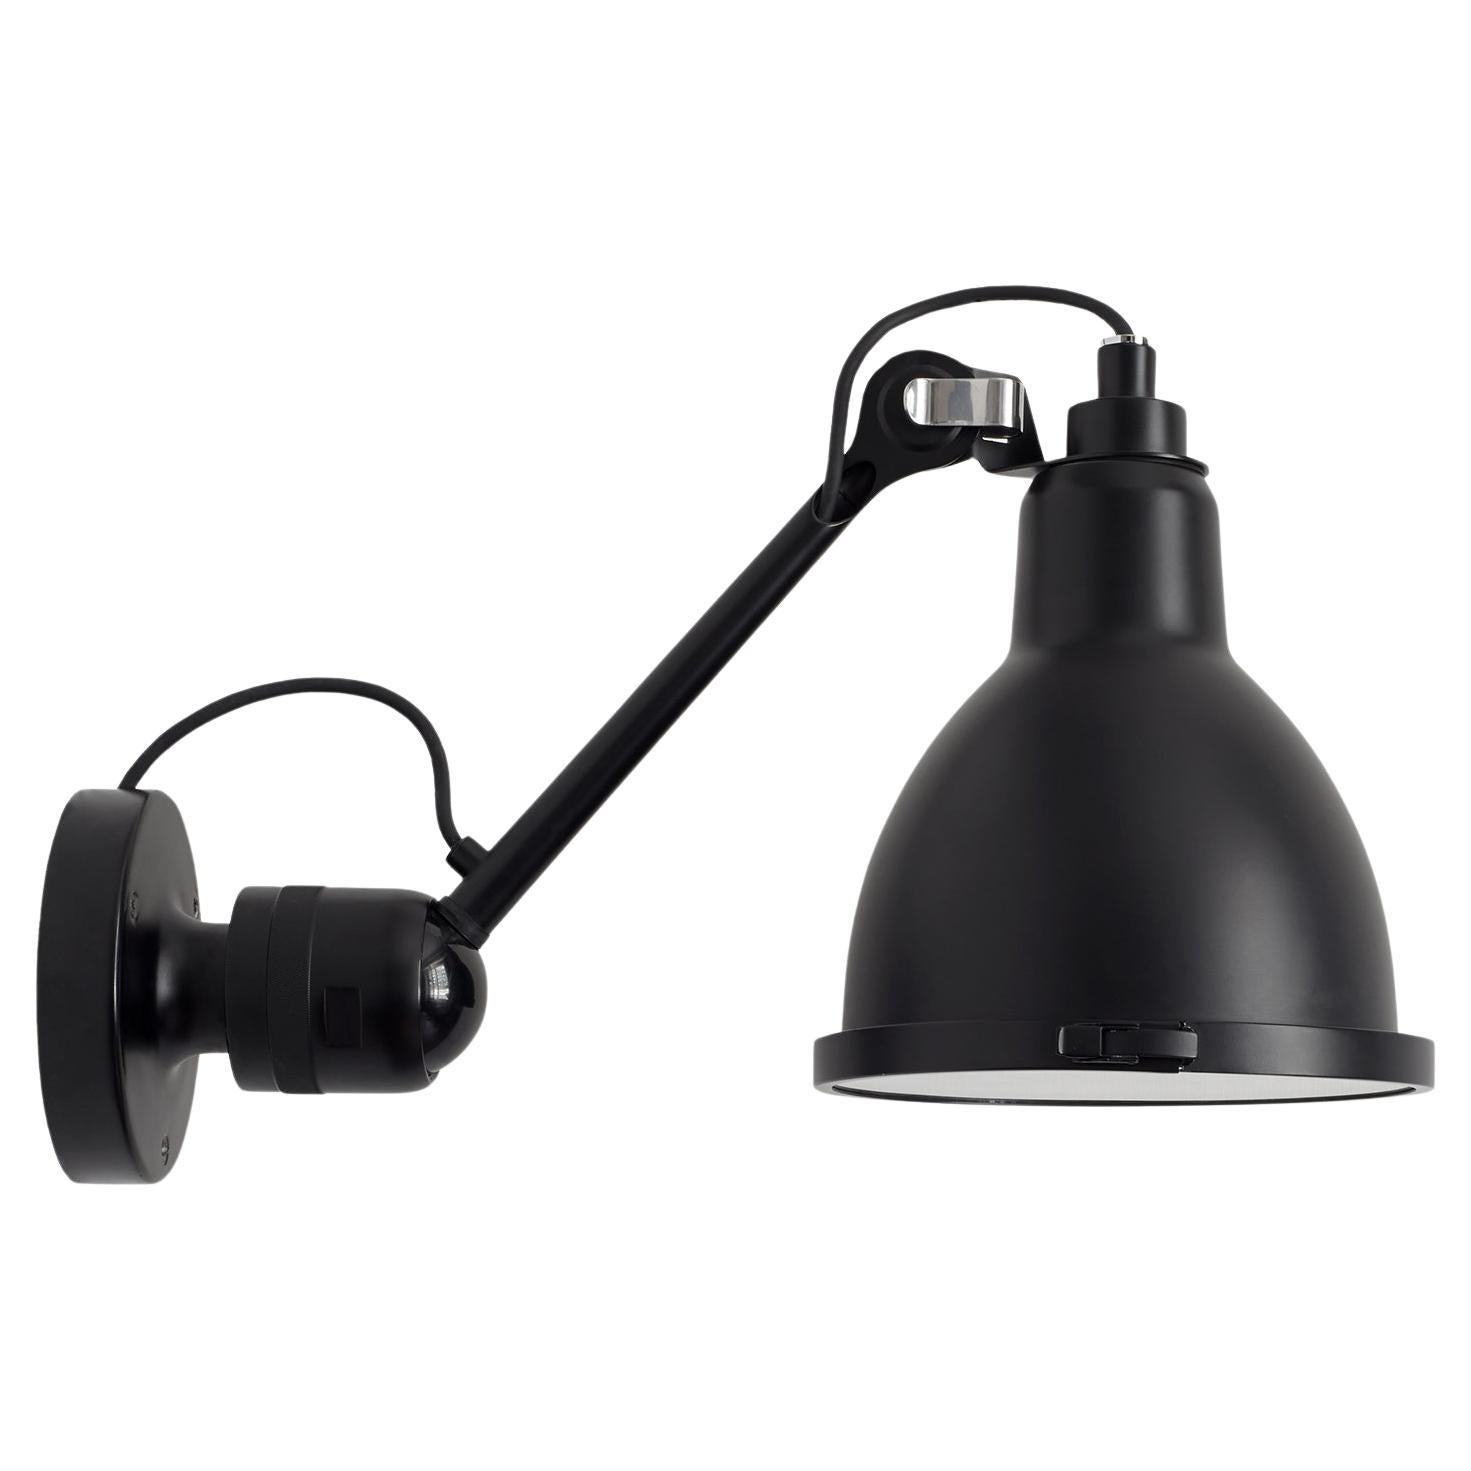 DCW Editions La Lampe Gras N°304 XL Round Wall Lamp in Black Shade